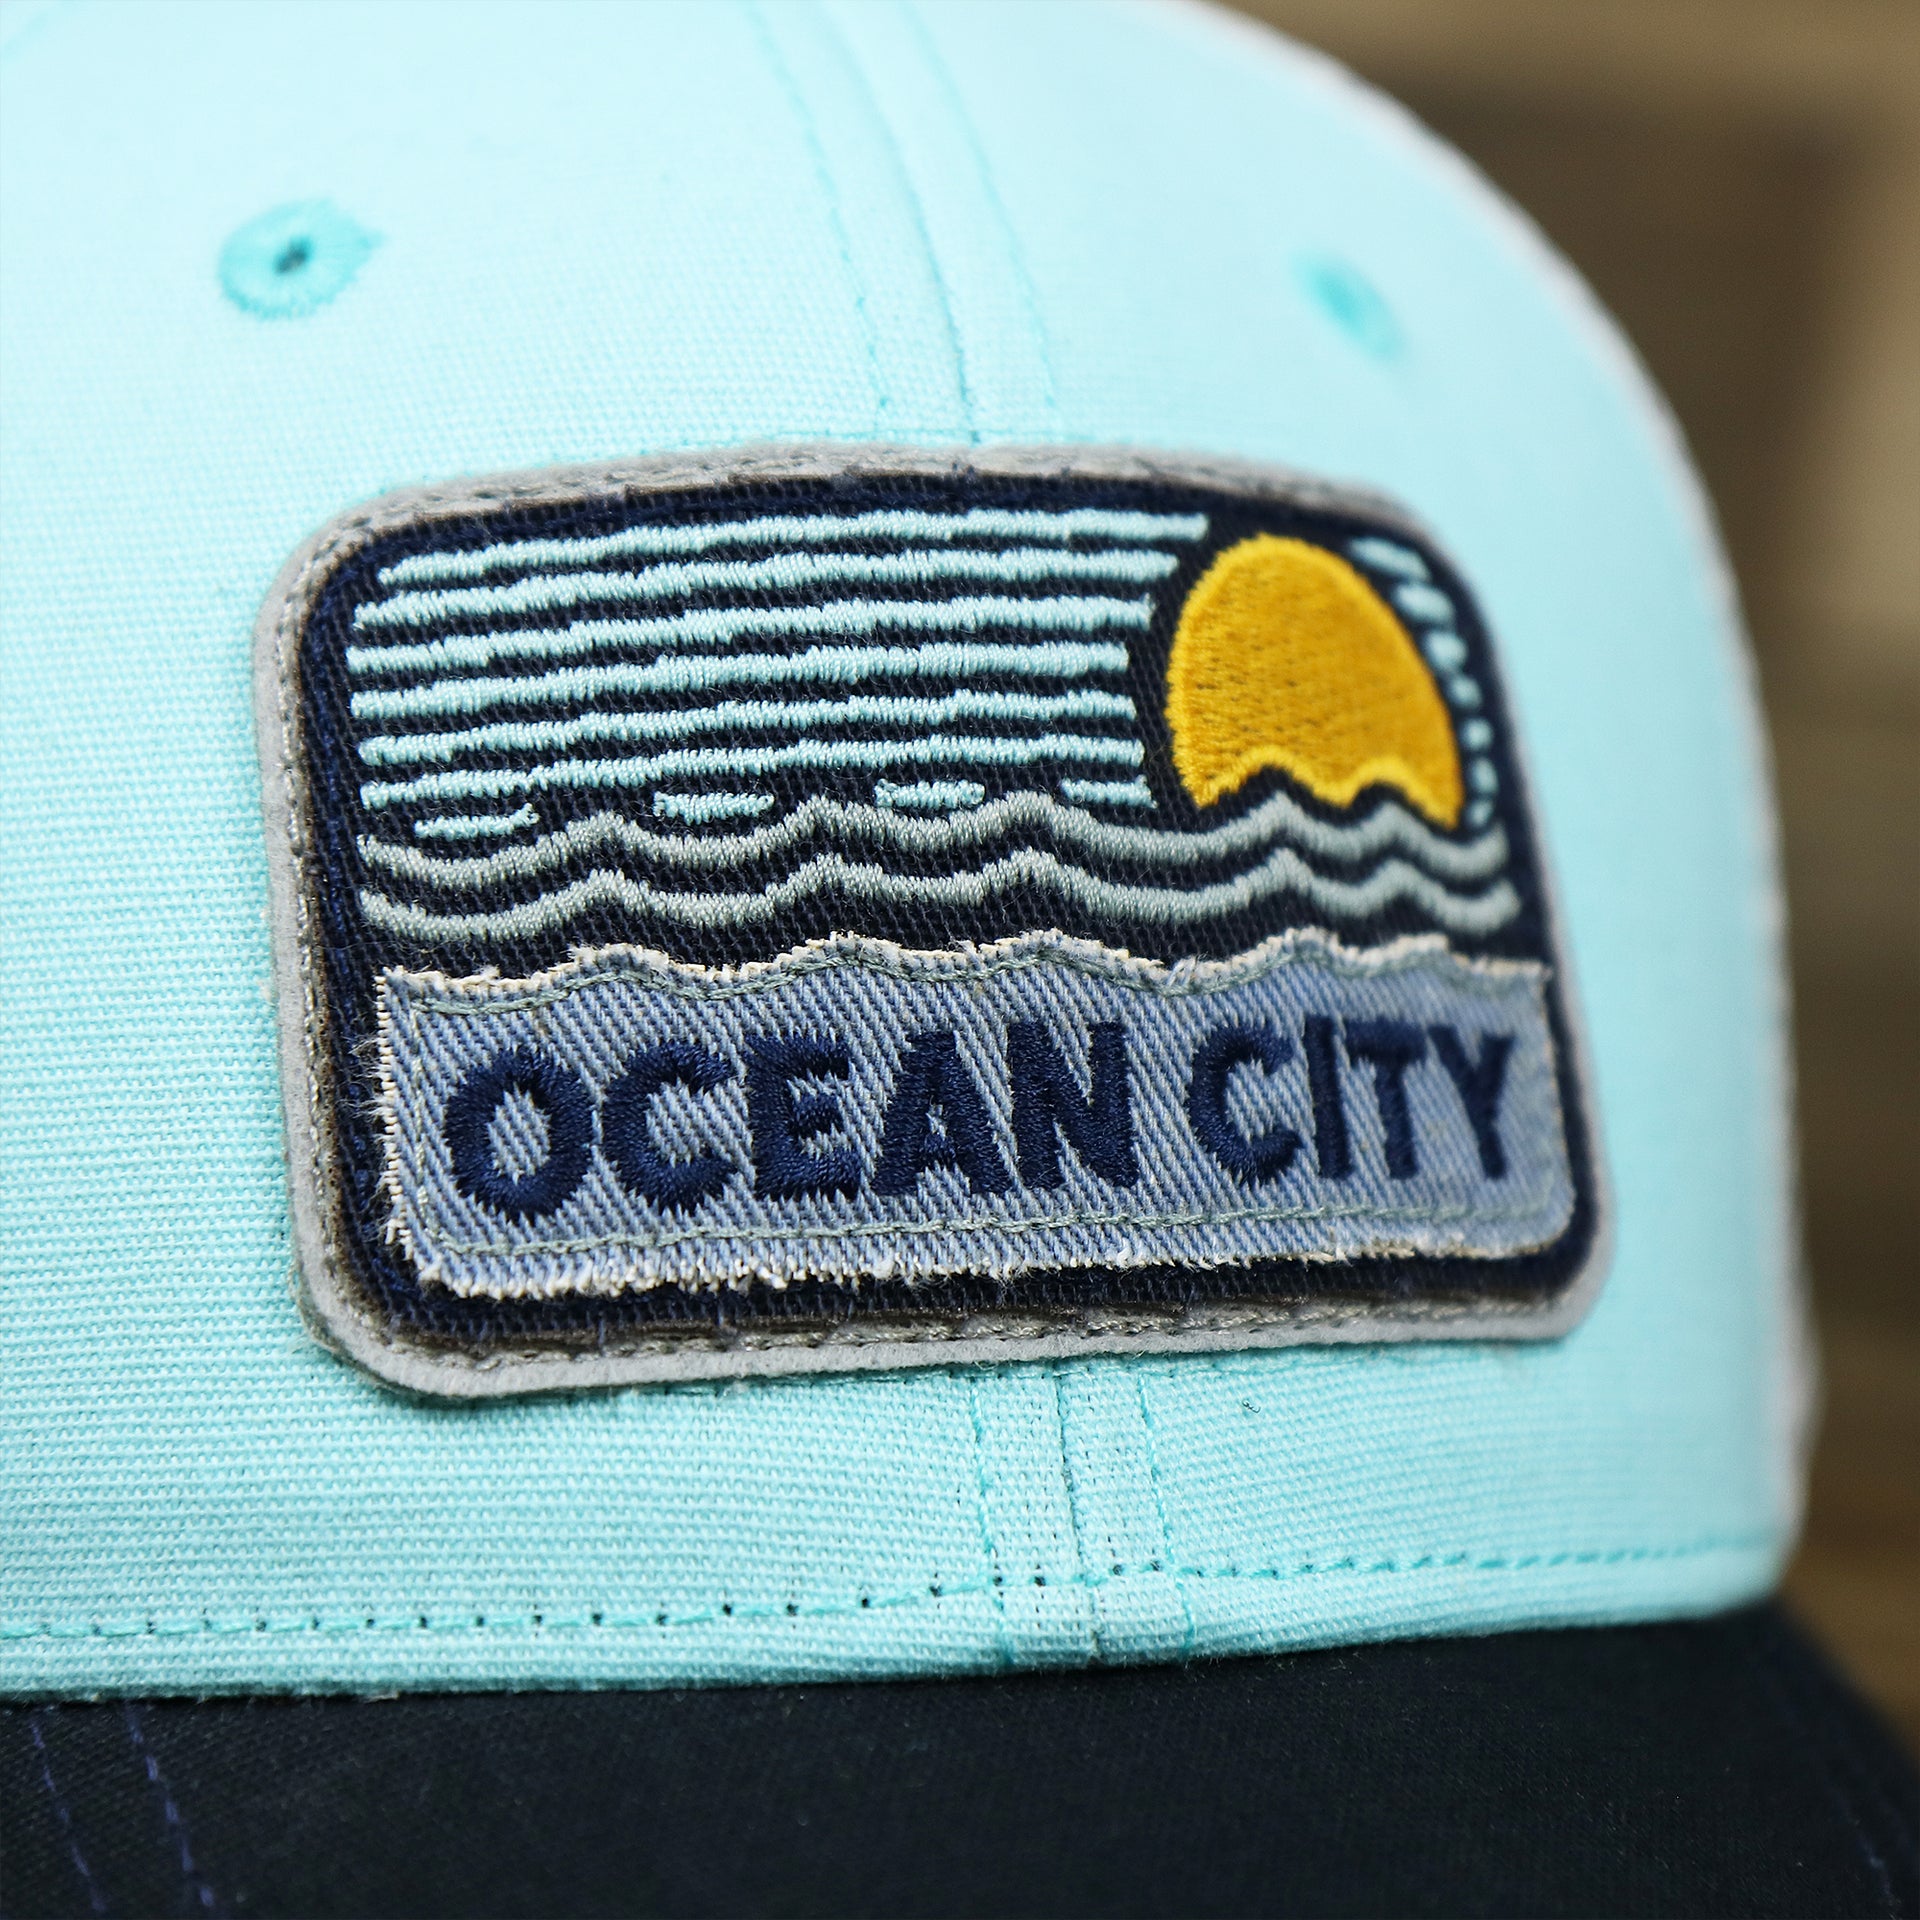 The Ocean City Sunset Patch on the New Jersey Ocean City Sunset Mesh Back Trucker Hat | Black And Grey Mesh Trucker Hat